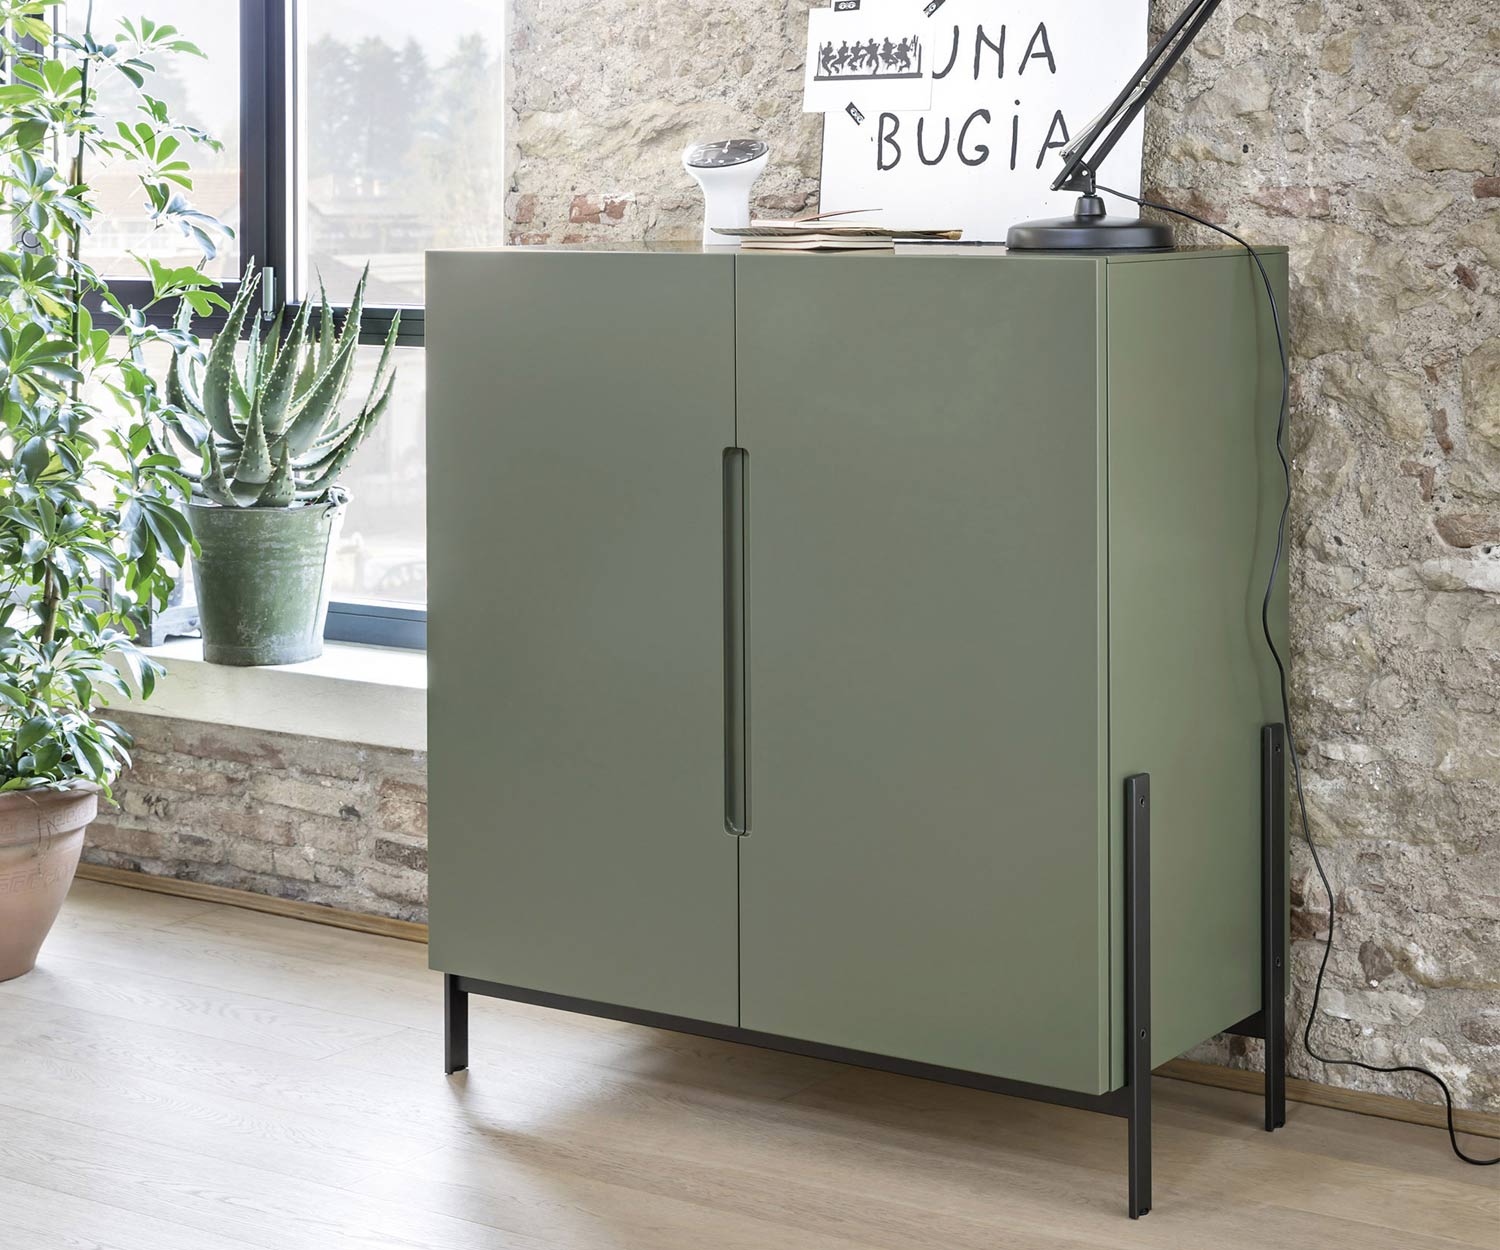 Matt green lacquered Float highboard from Novamobili with narrow legs in the living room